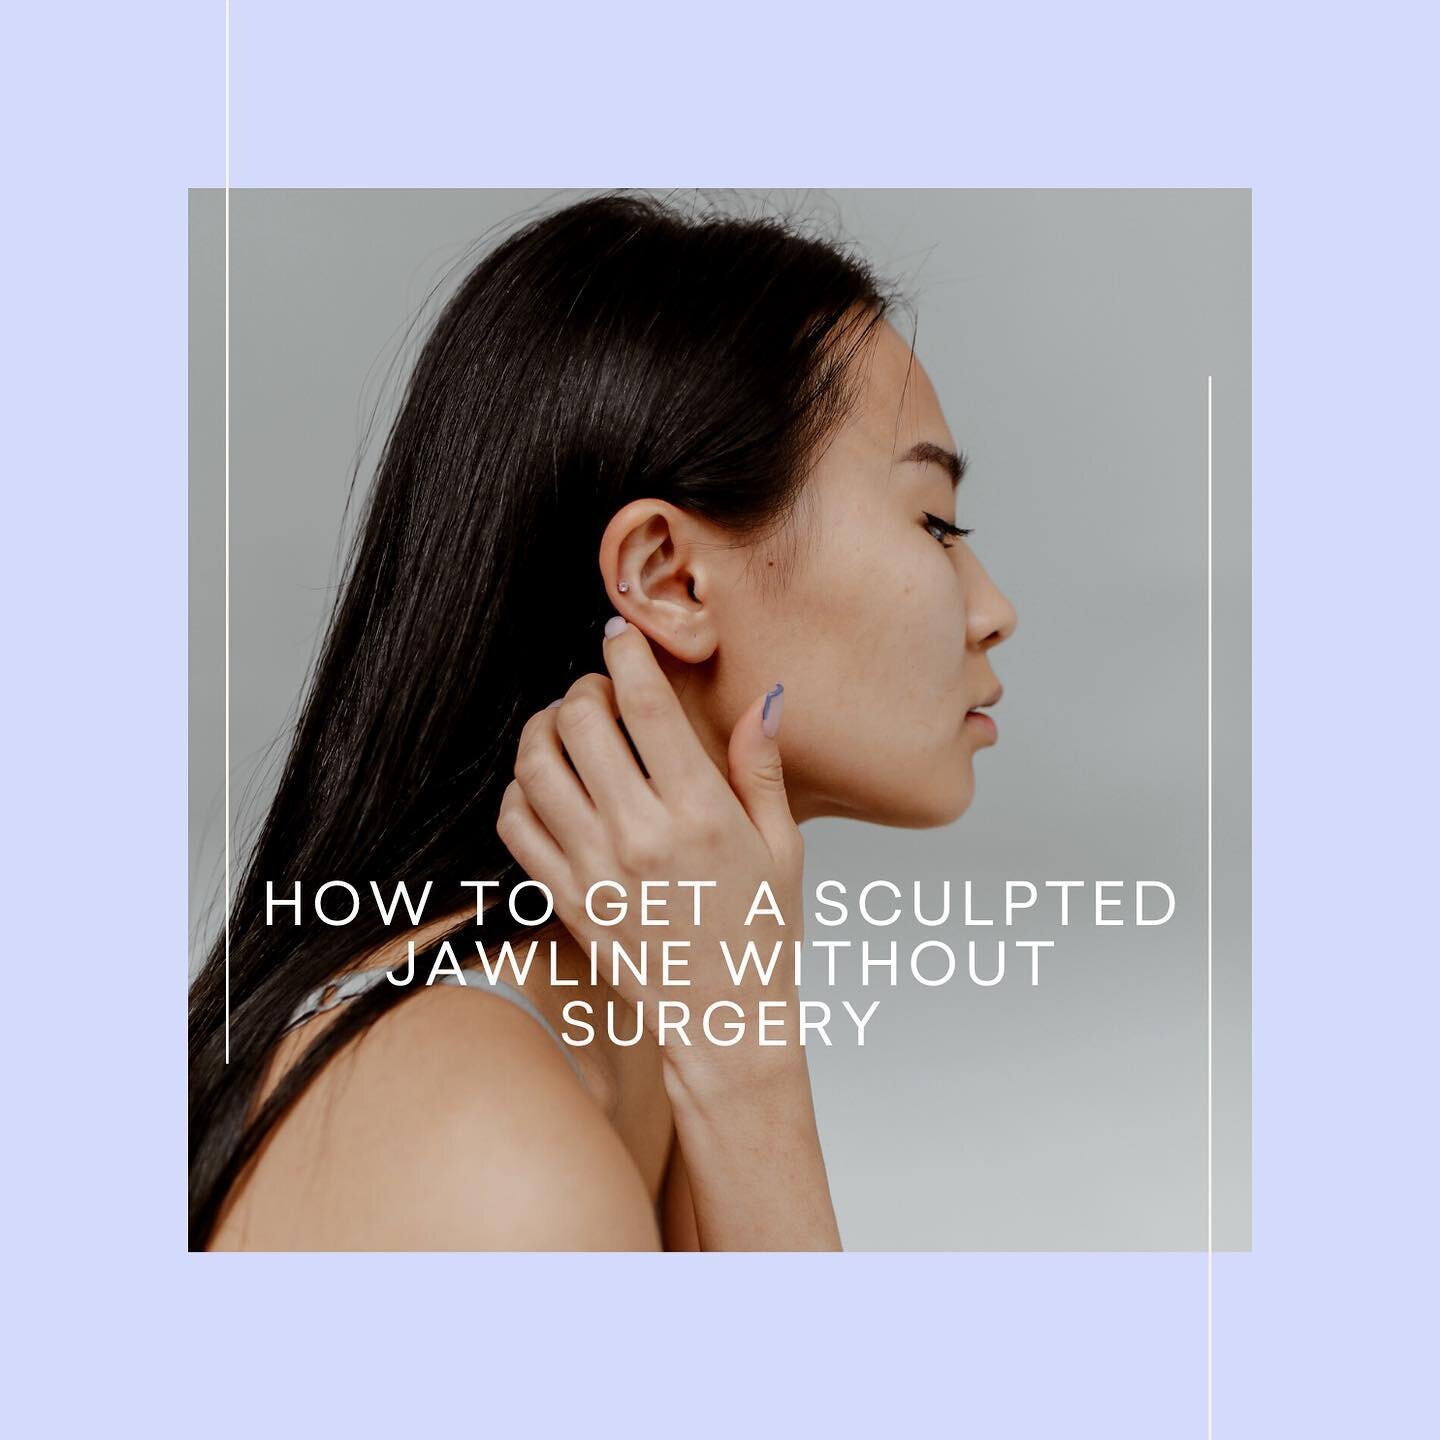 CryoSlimming + CryoToning = Your Newly Snatched Jawline! 

Swipe for all the details on how to achieve a sculpted jawline with CryoSlimming and CryoToning at FACE. 

//

#cryoslimming #cryotoning #kybella #doublechin #snatched #jawlinecontouring #fac